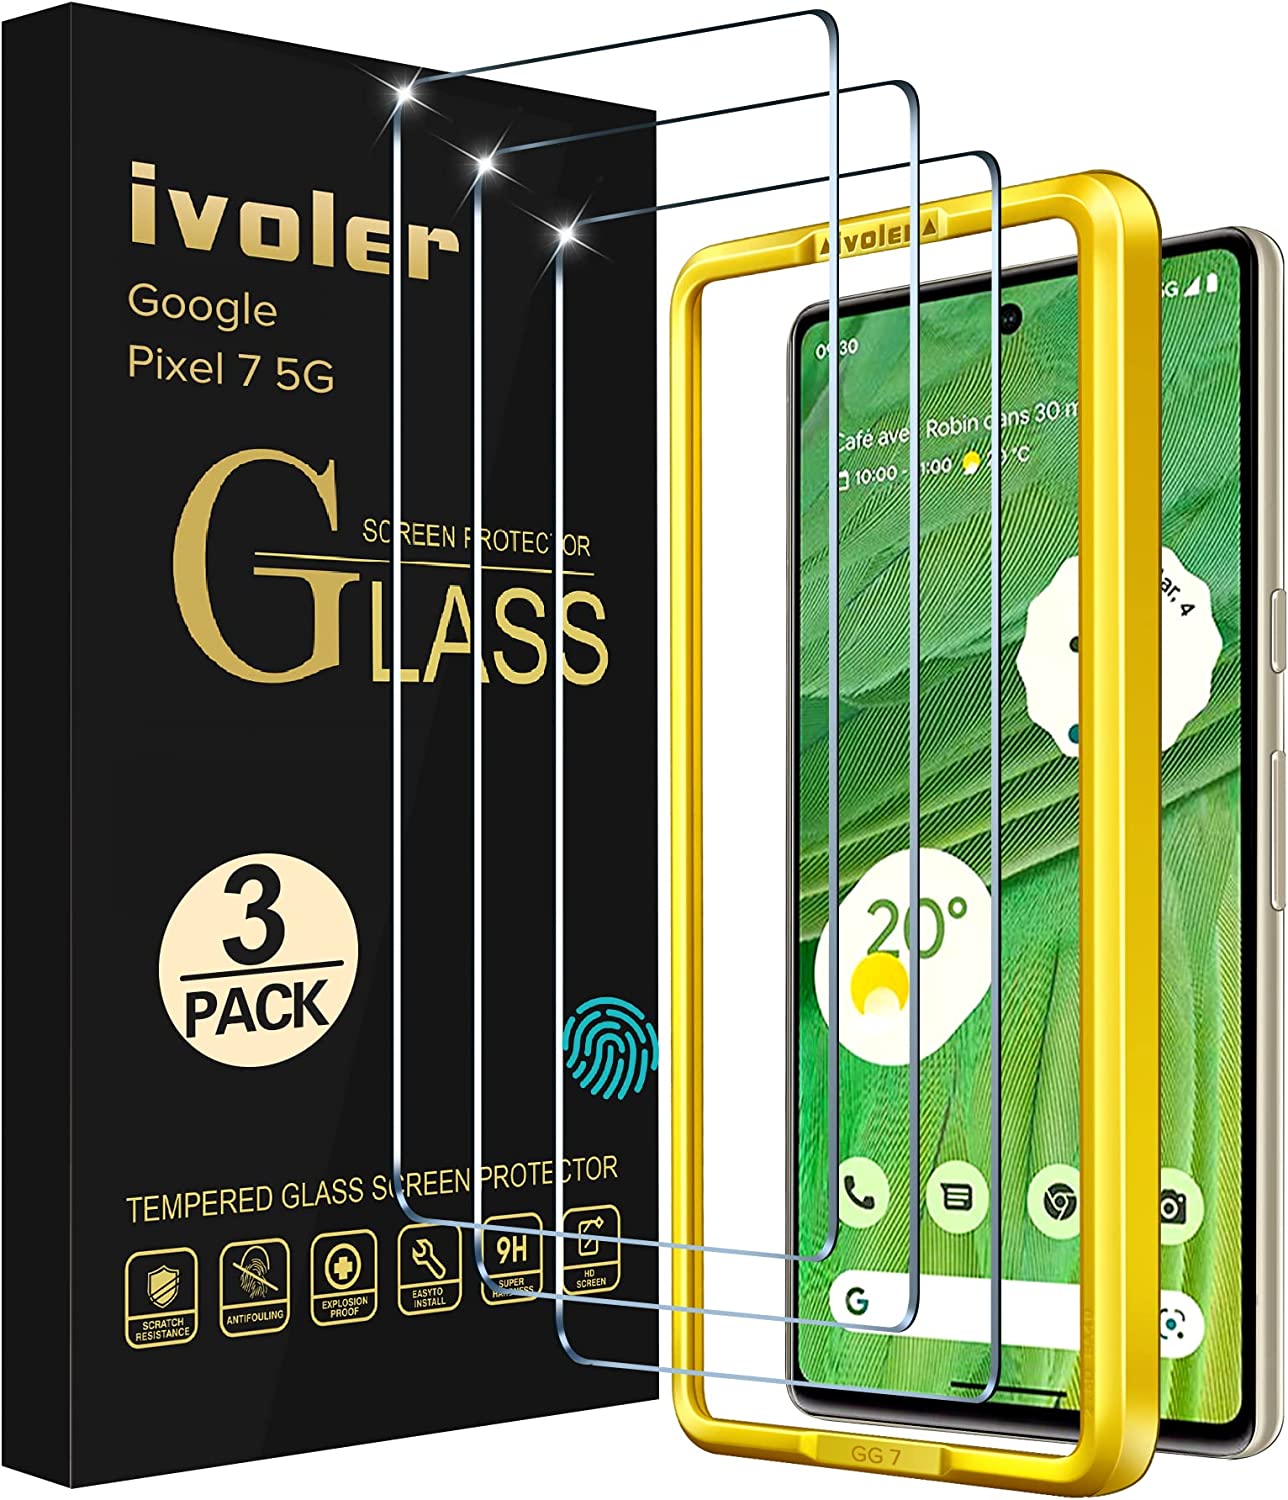 ivoler [3 Pack] Screen Protector Tempered Glass for Google Pixel 7 5G 2022